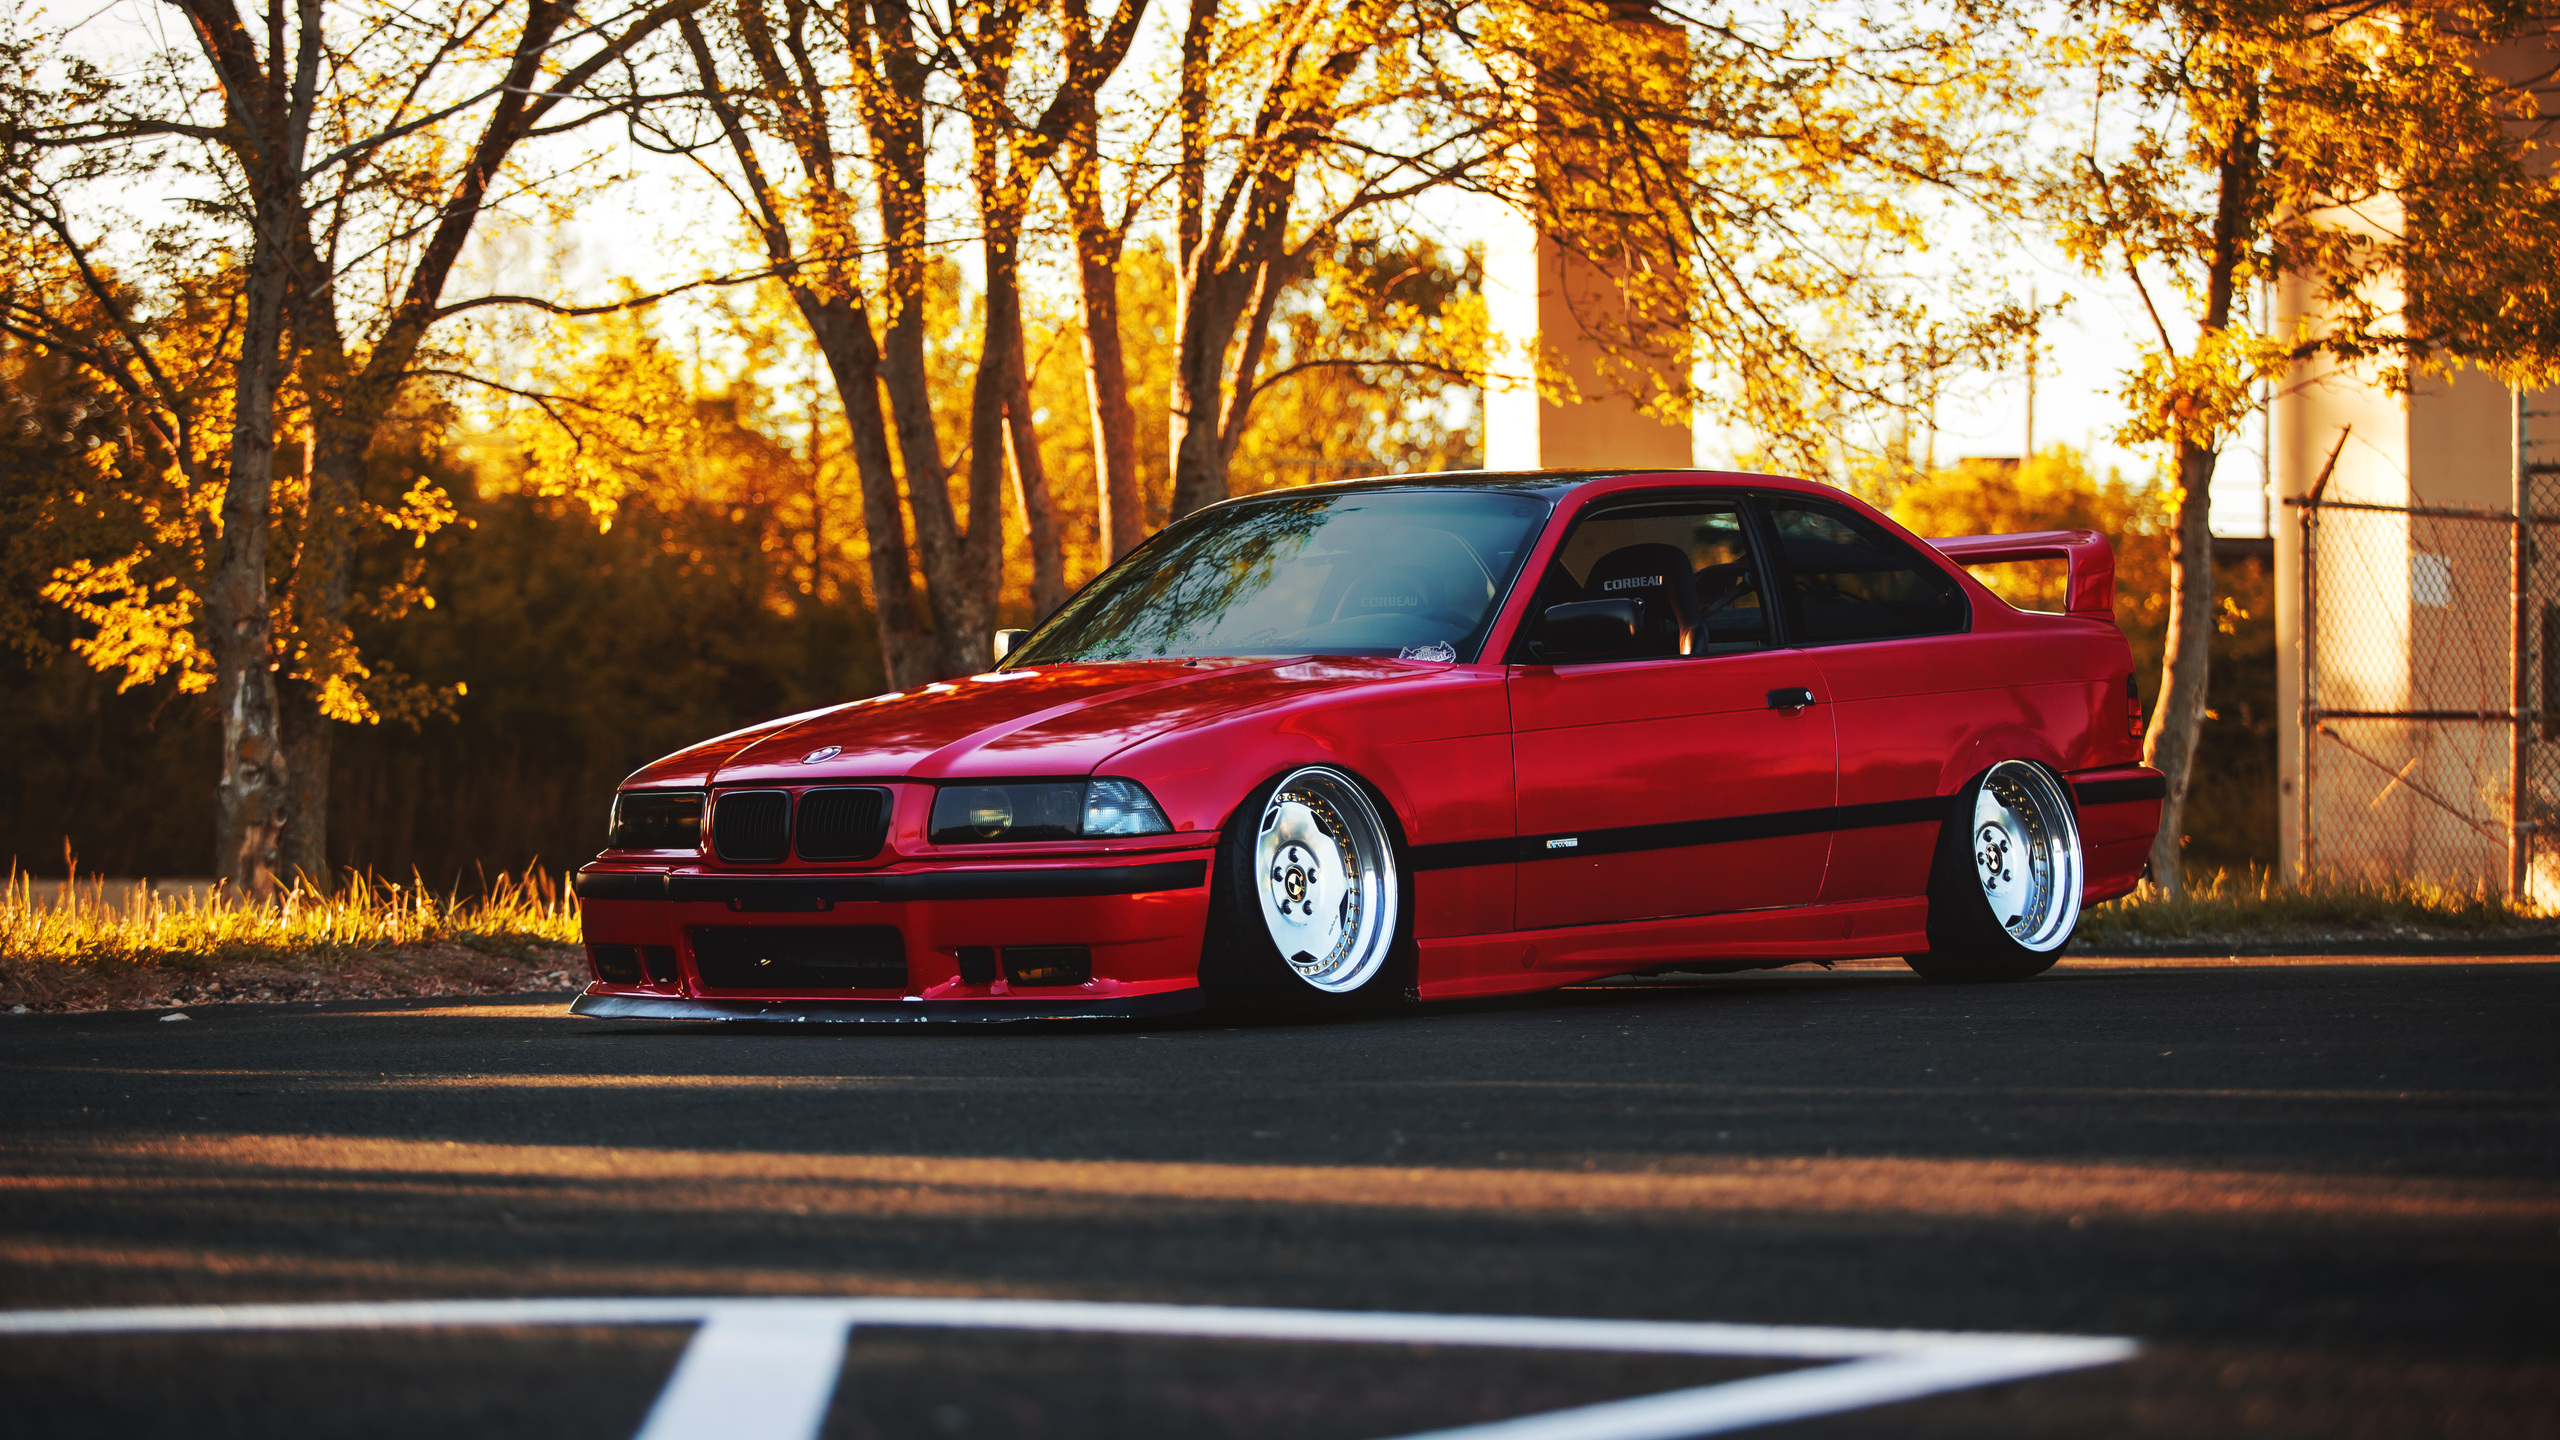 Red, E36, Bmw, Tuning, Red, Auto, Tuning, Bmw Photo - Bmw E36 Tuning Red - HD Wallpaper 